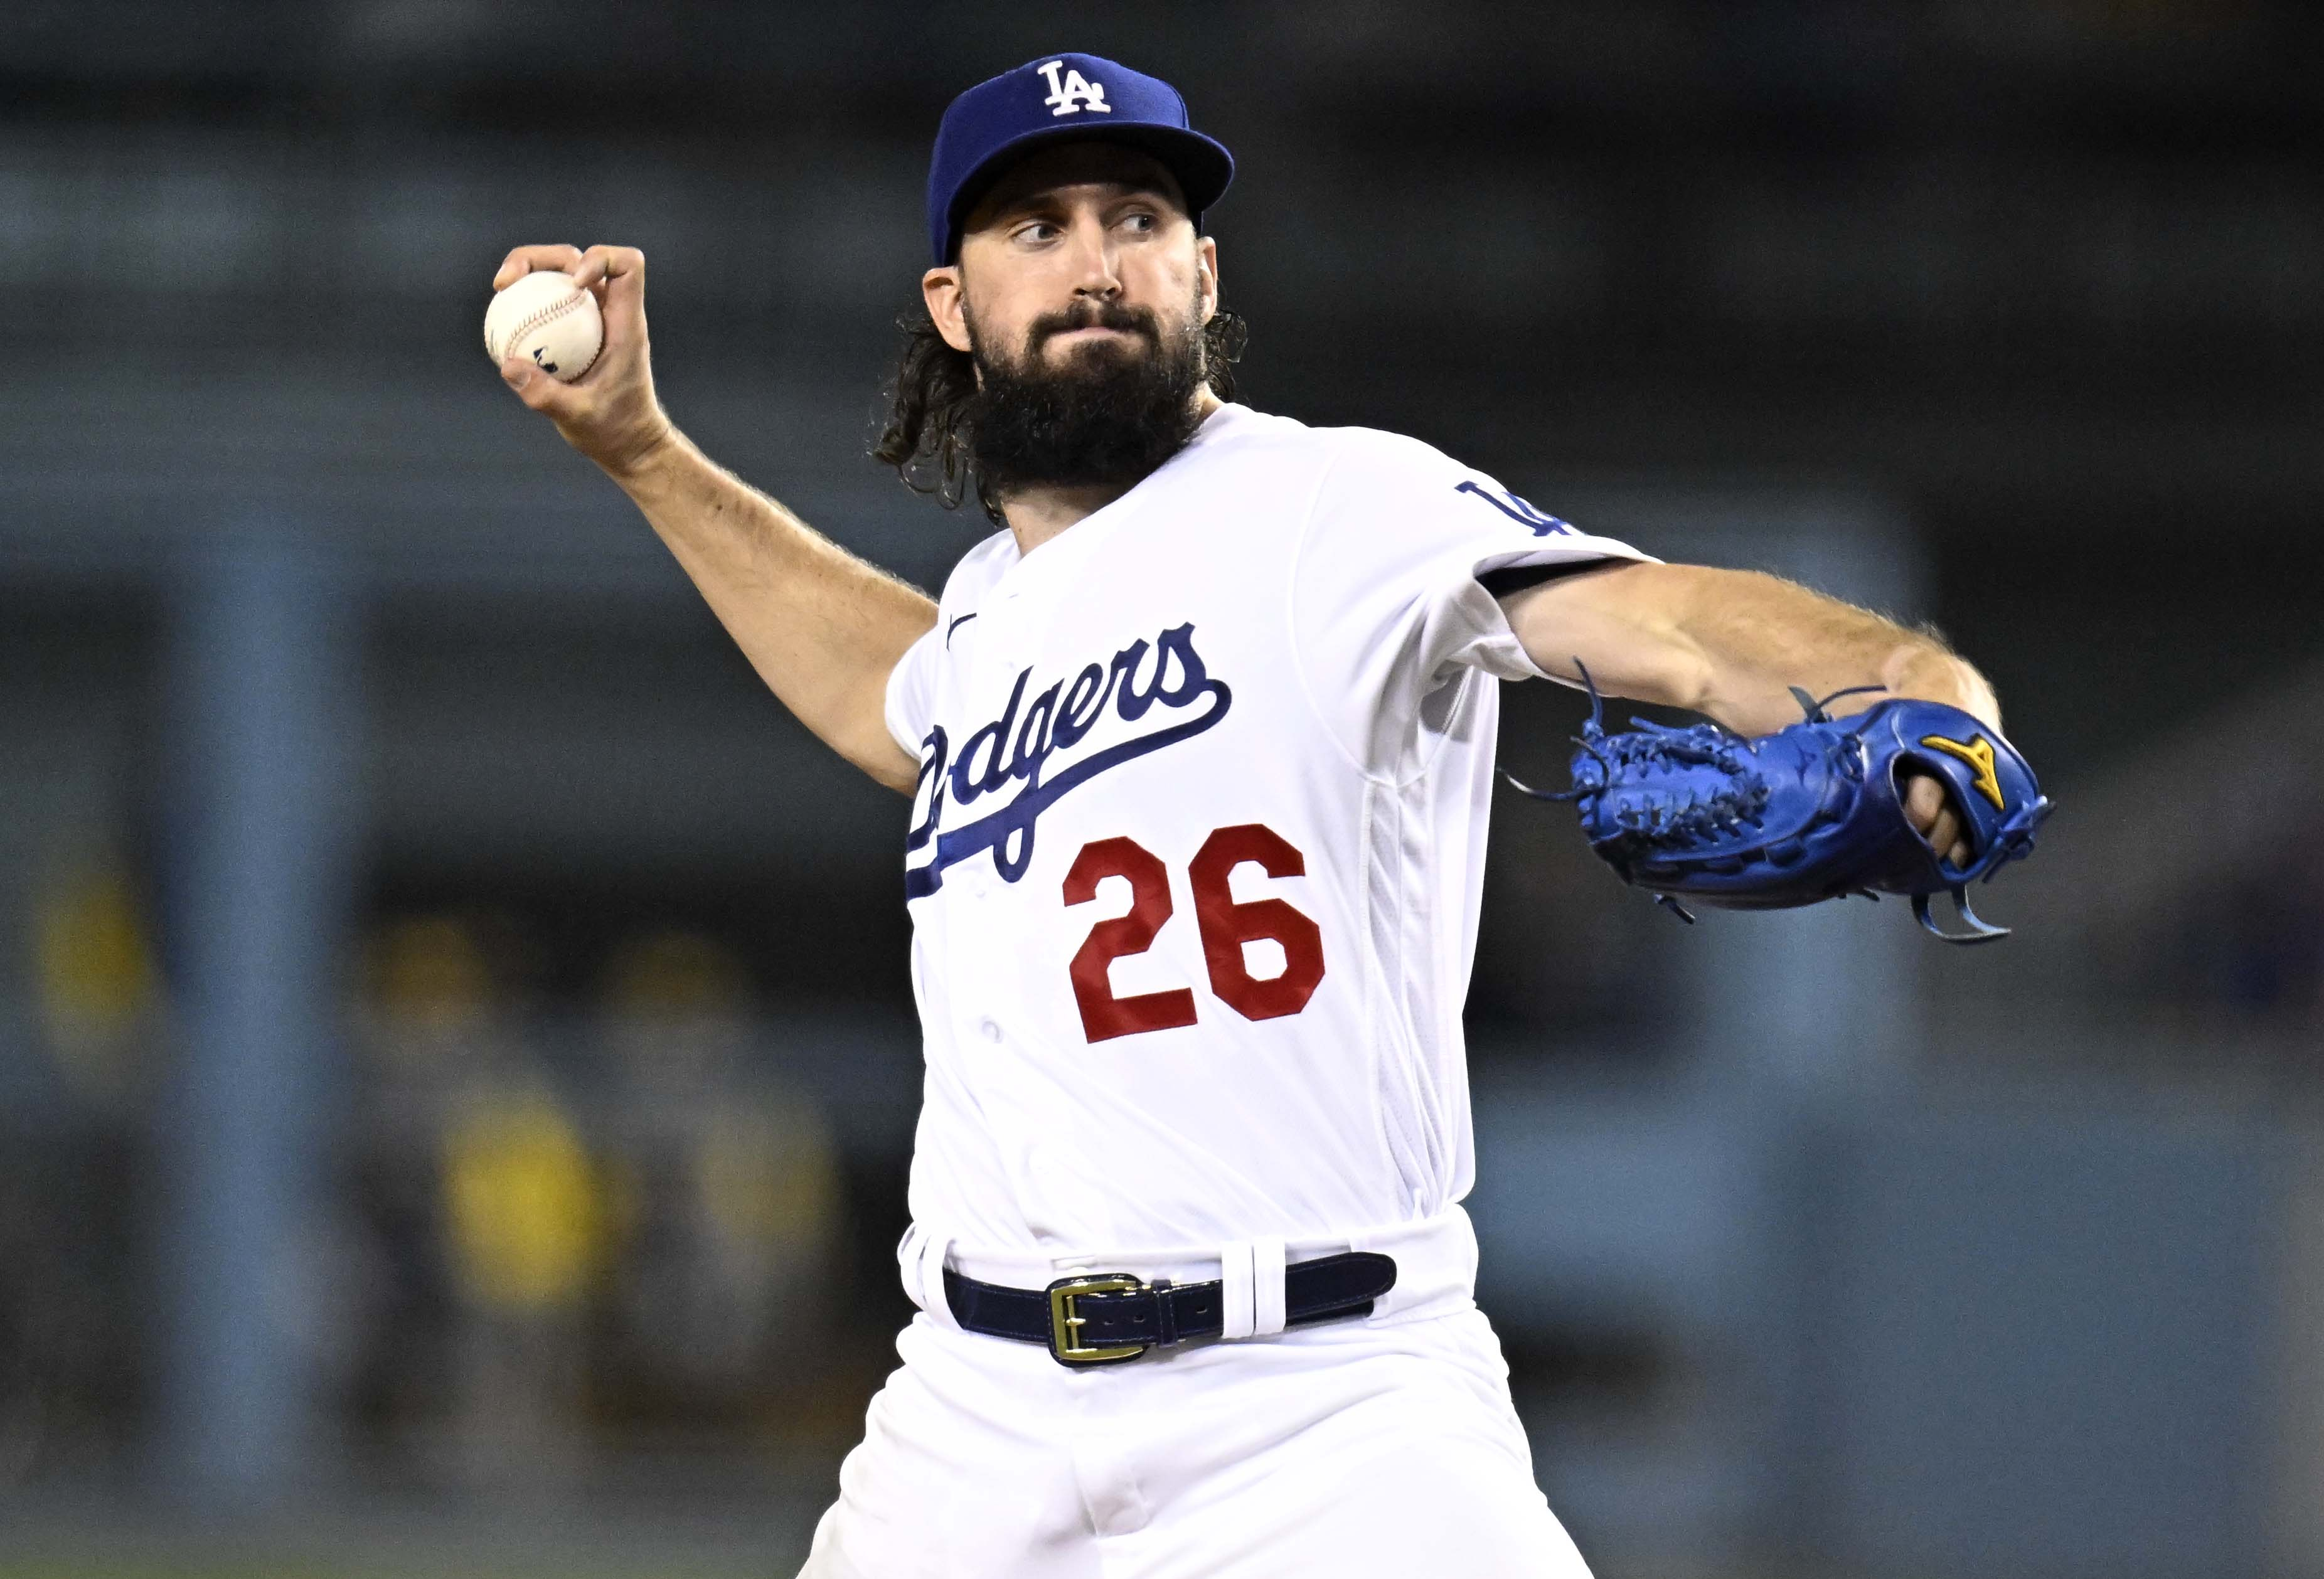 Los Angeles Dodgers defeated the Milwaukee Brewers 10-1 during a MLB baseball game.